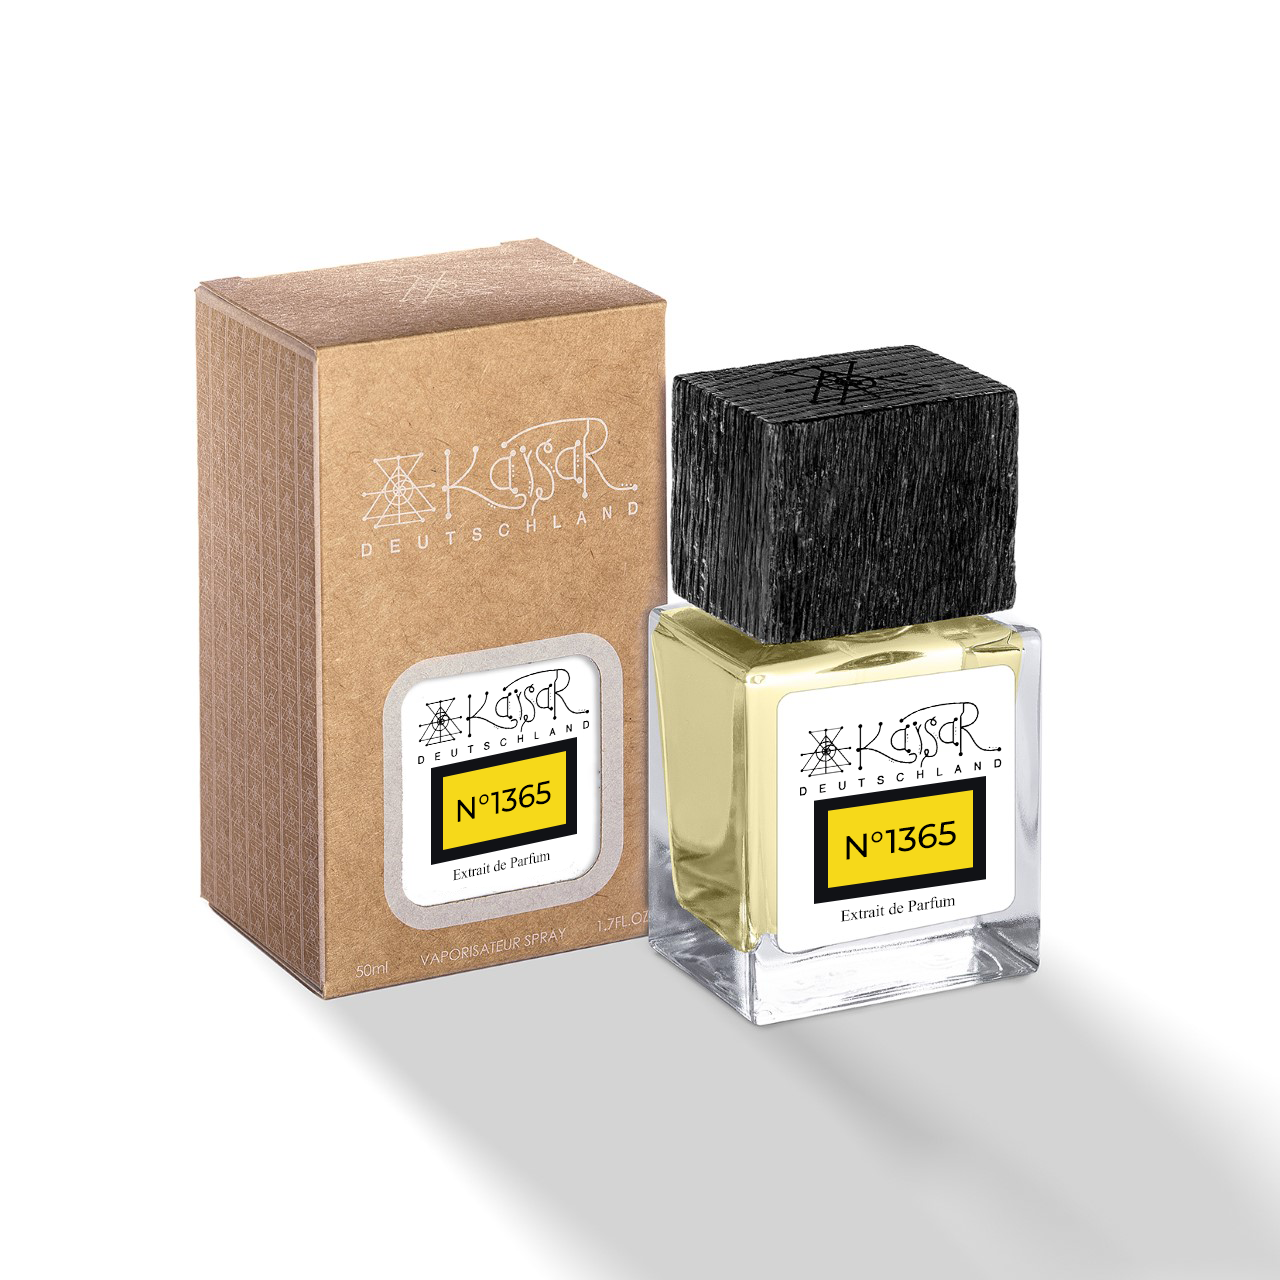 DH 1366 The Night Scent